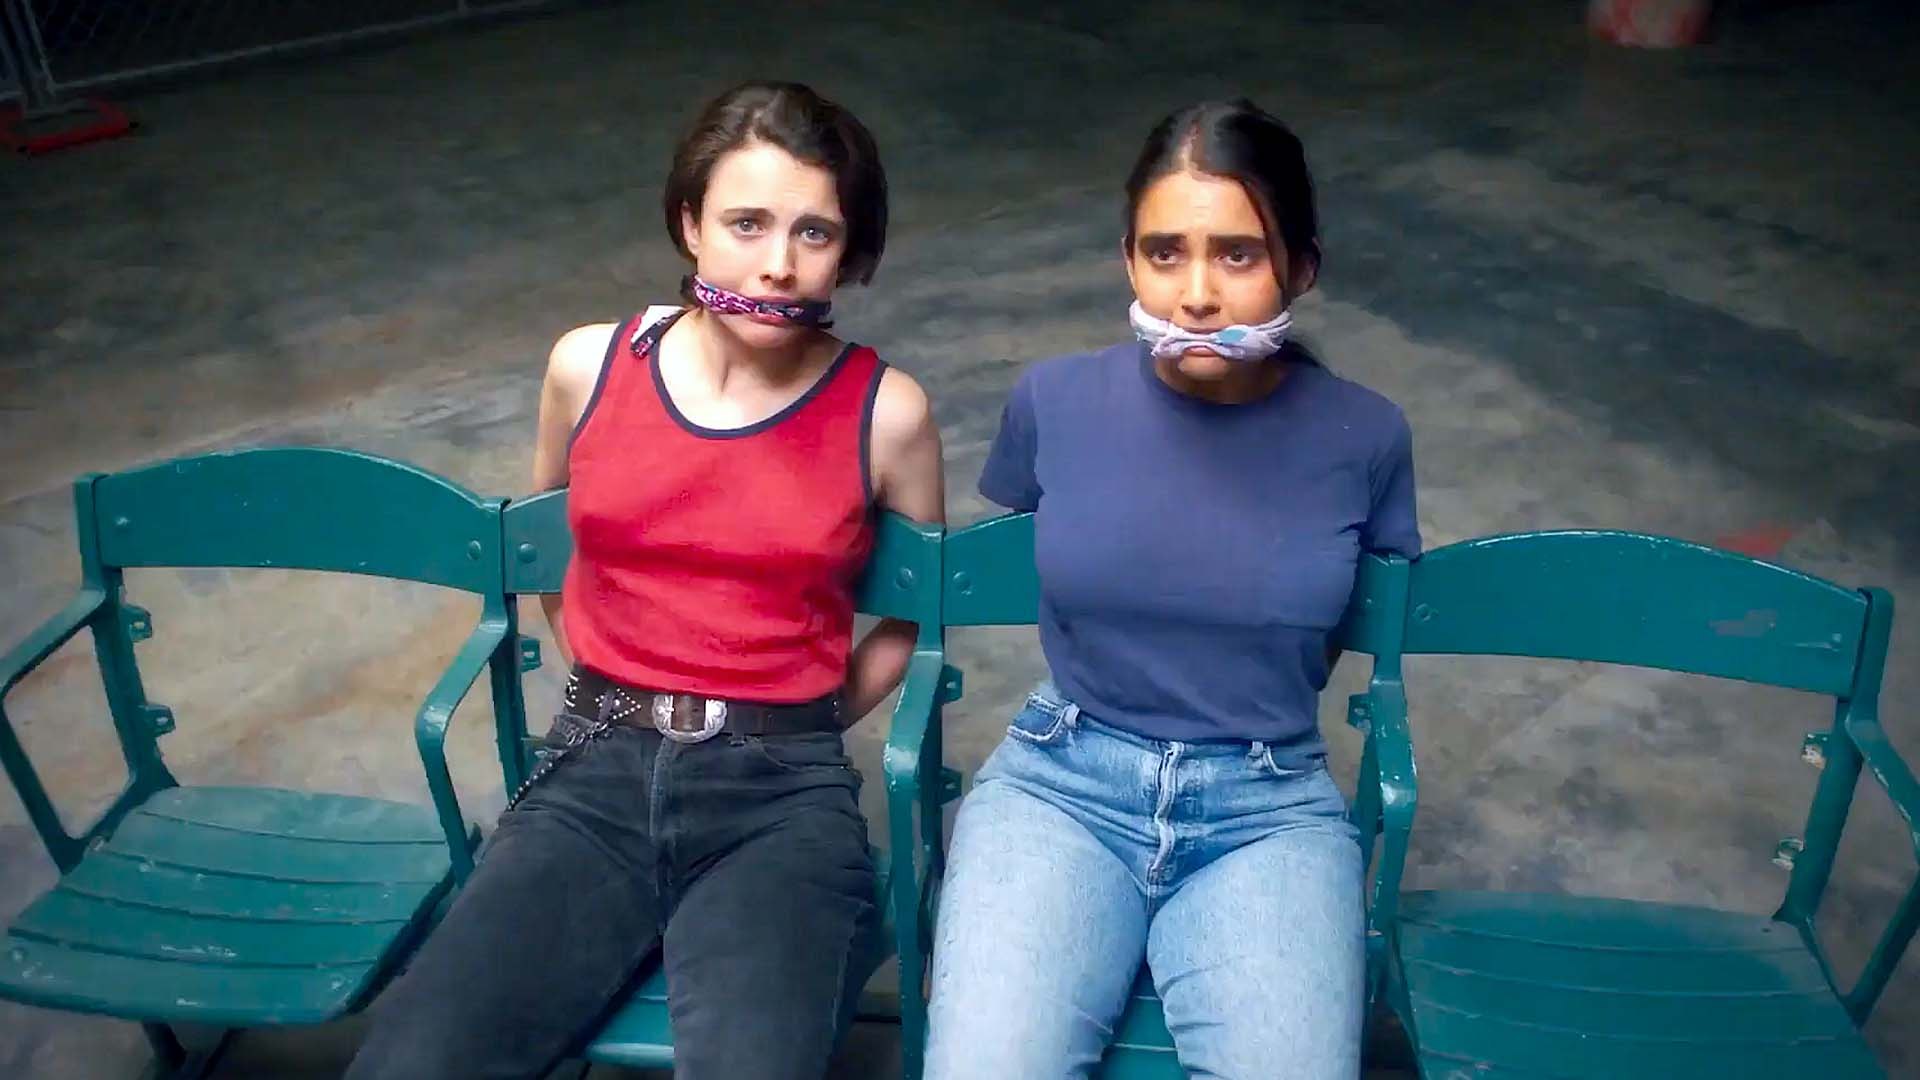 Drive Away Dolls Trailer: Margaret Qualley, Pedro Pascal Star in Movie